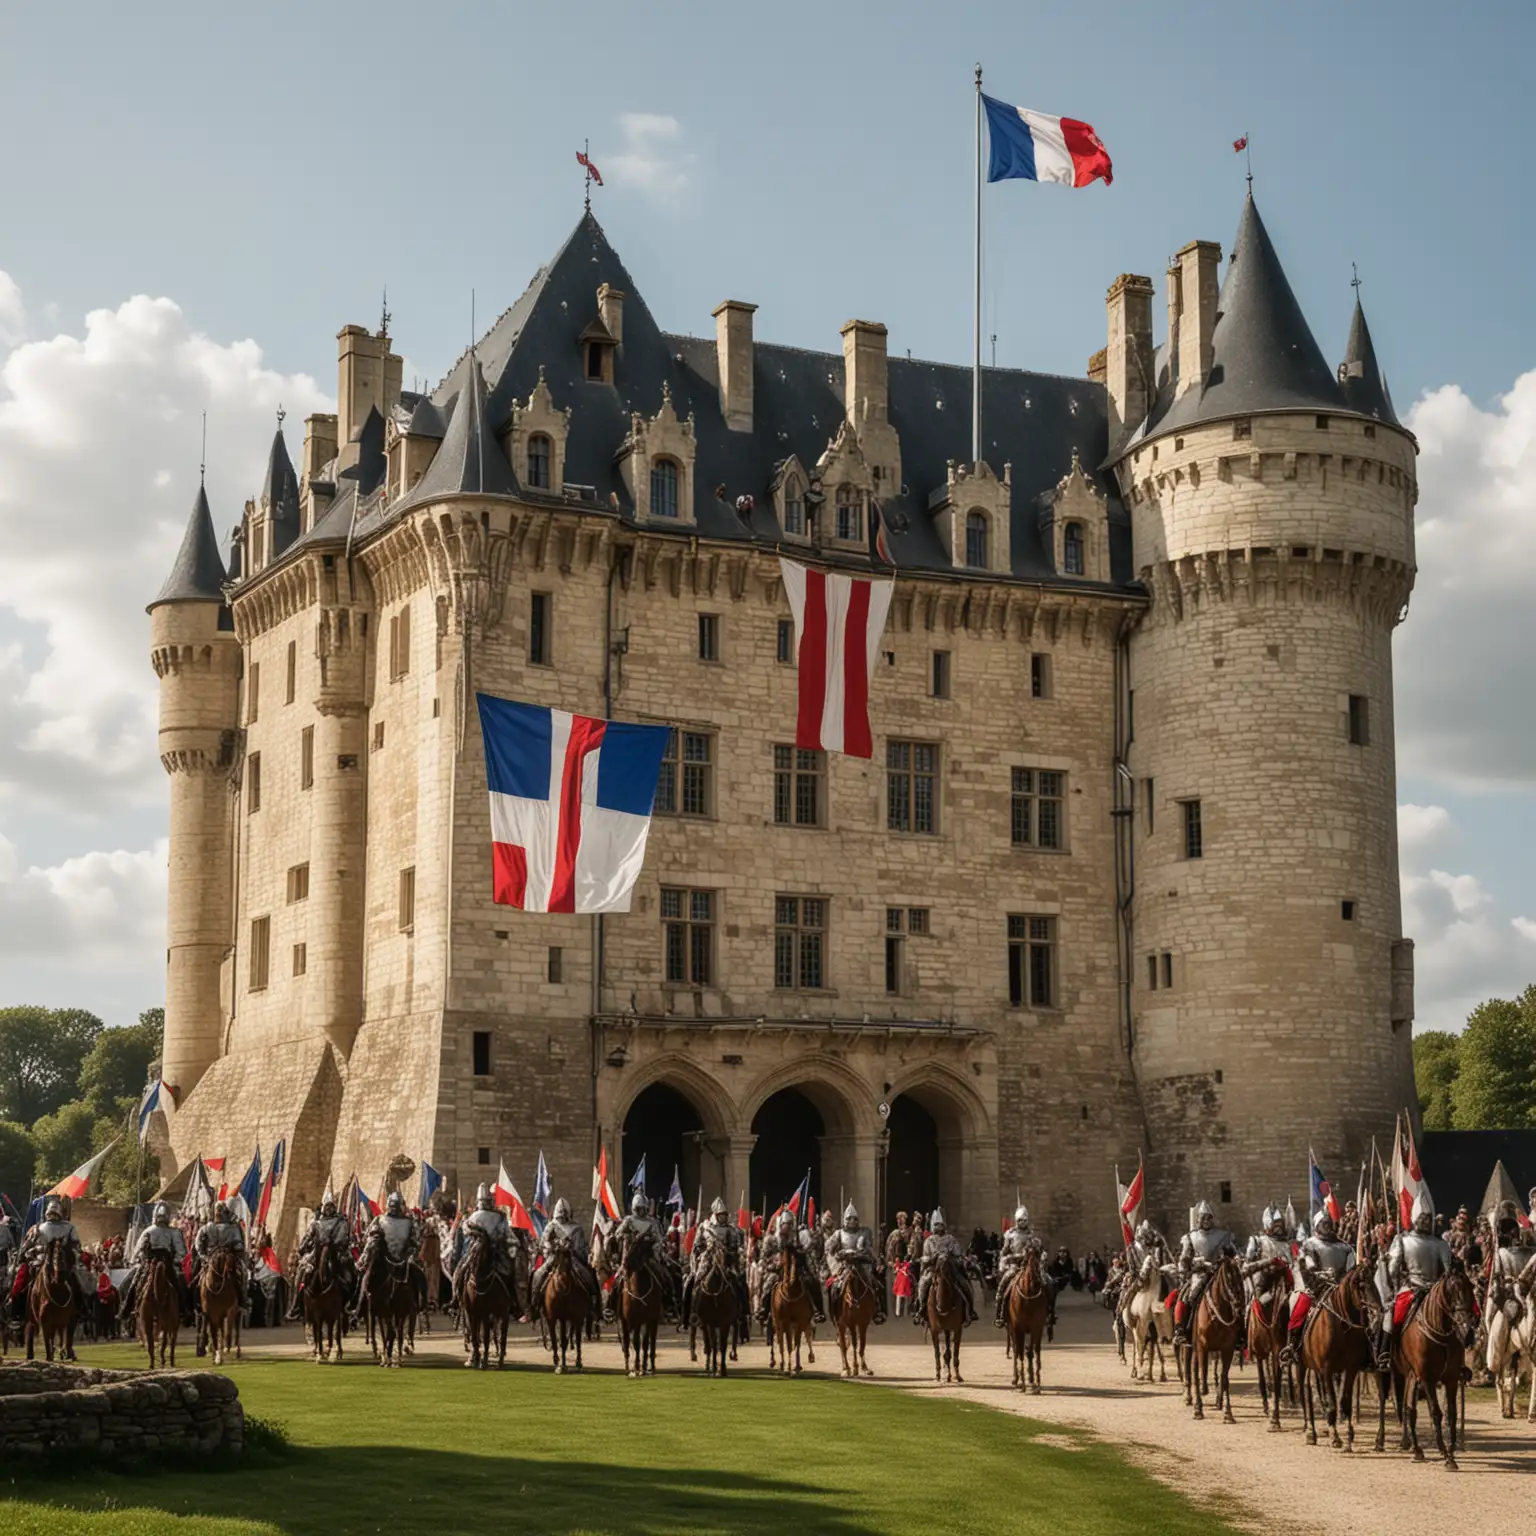 a Normandy-style castle, flying a French flag. Nearby are Norman nobles and soldiers in medieval clothing, symbolizing the contribution of the Normans to English law and castle building.